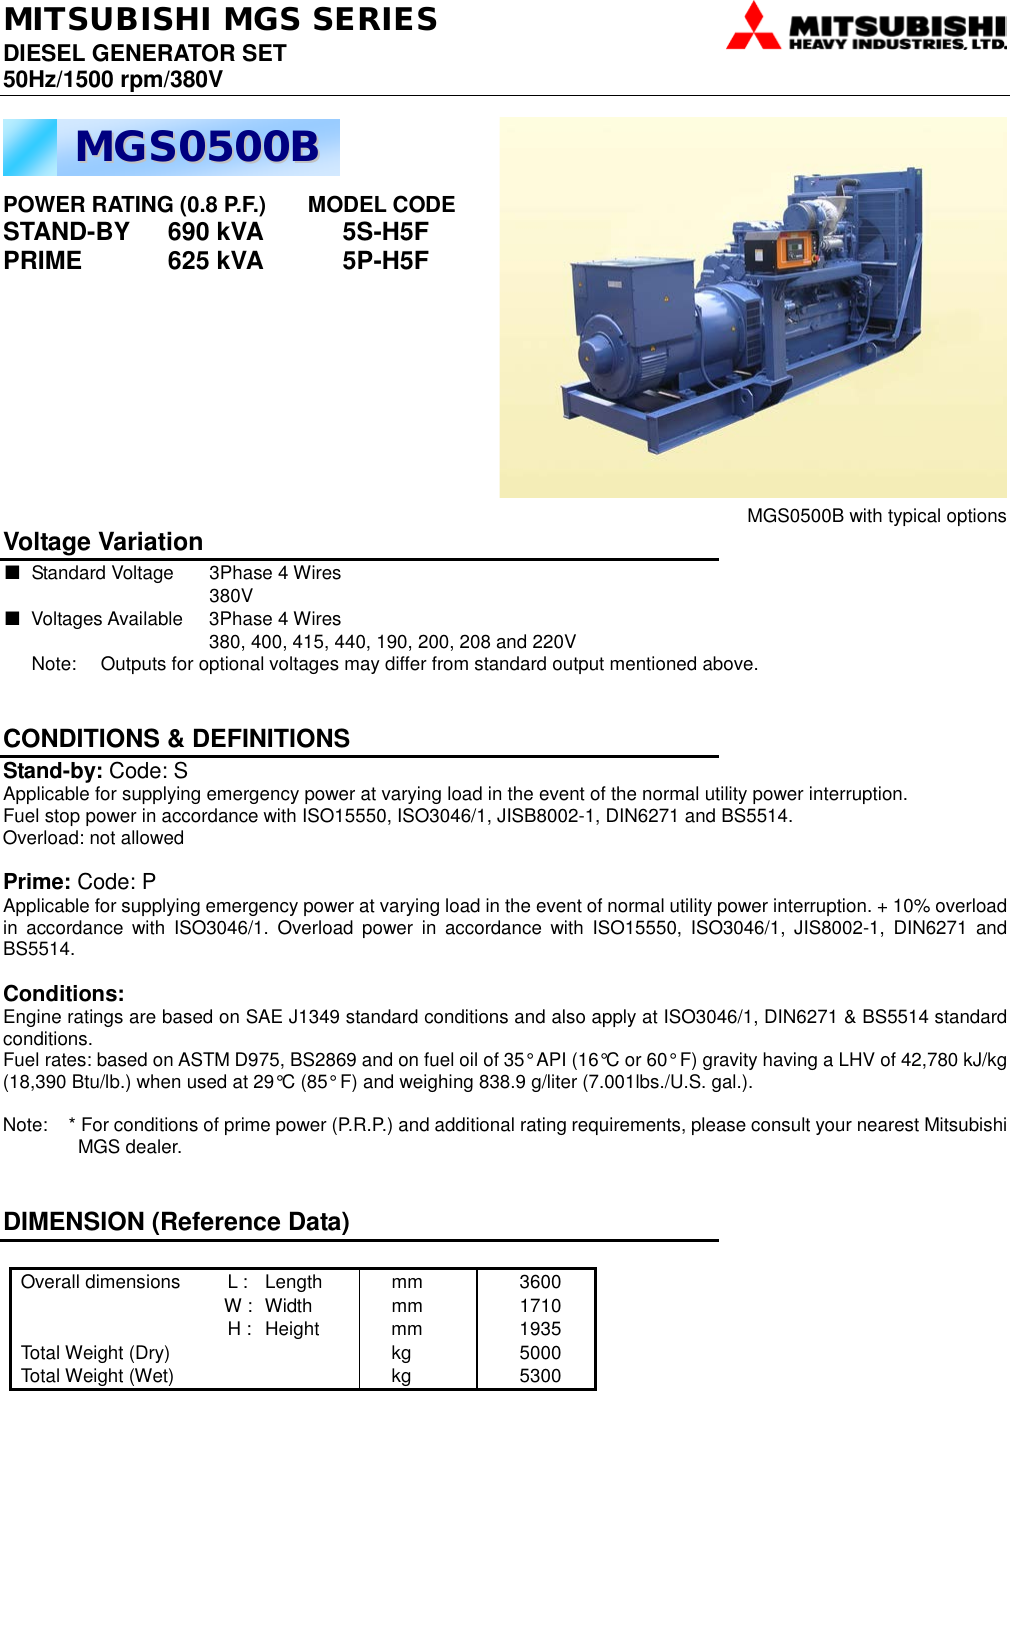 Page 1 of 4 - Mitsubishi 5P-H5F MGS SERIES 560 CONTROL PANEL User Manual  To The 5c219300-3202-4d1e-8773-f8b6084f2897